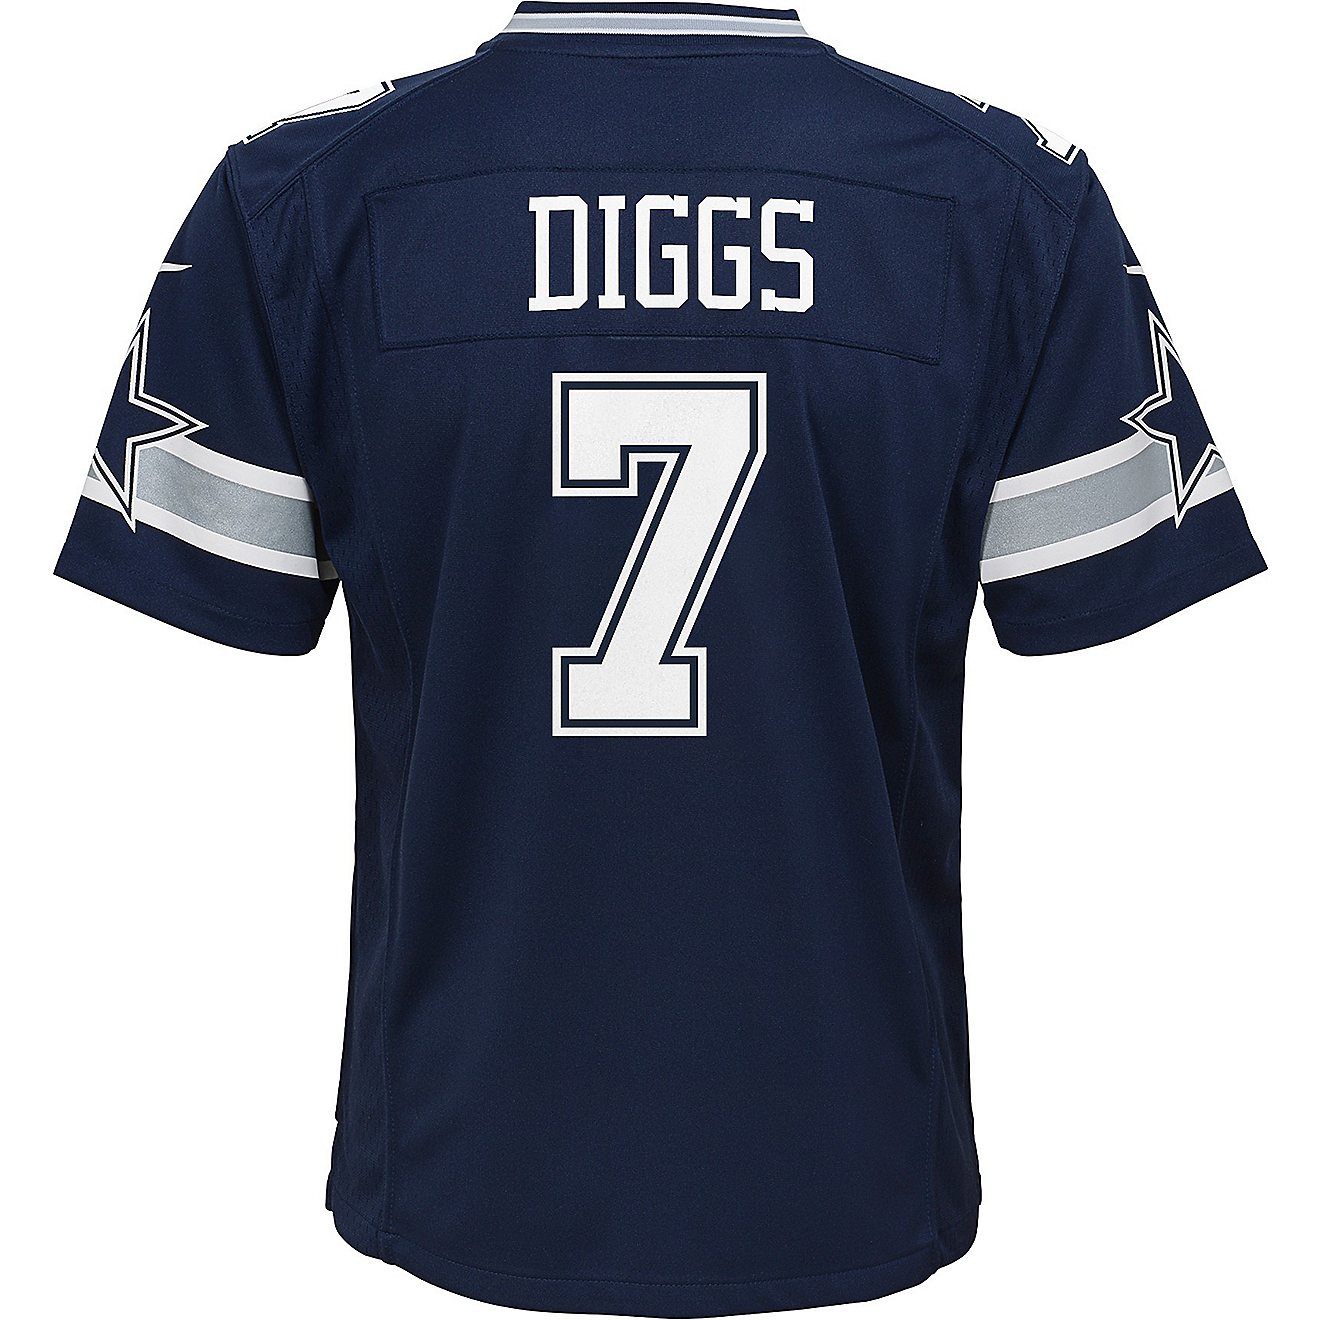 Nike Youth Dallas Cowboys TD7 Jersey                                                                                             - view number 2